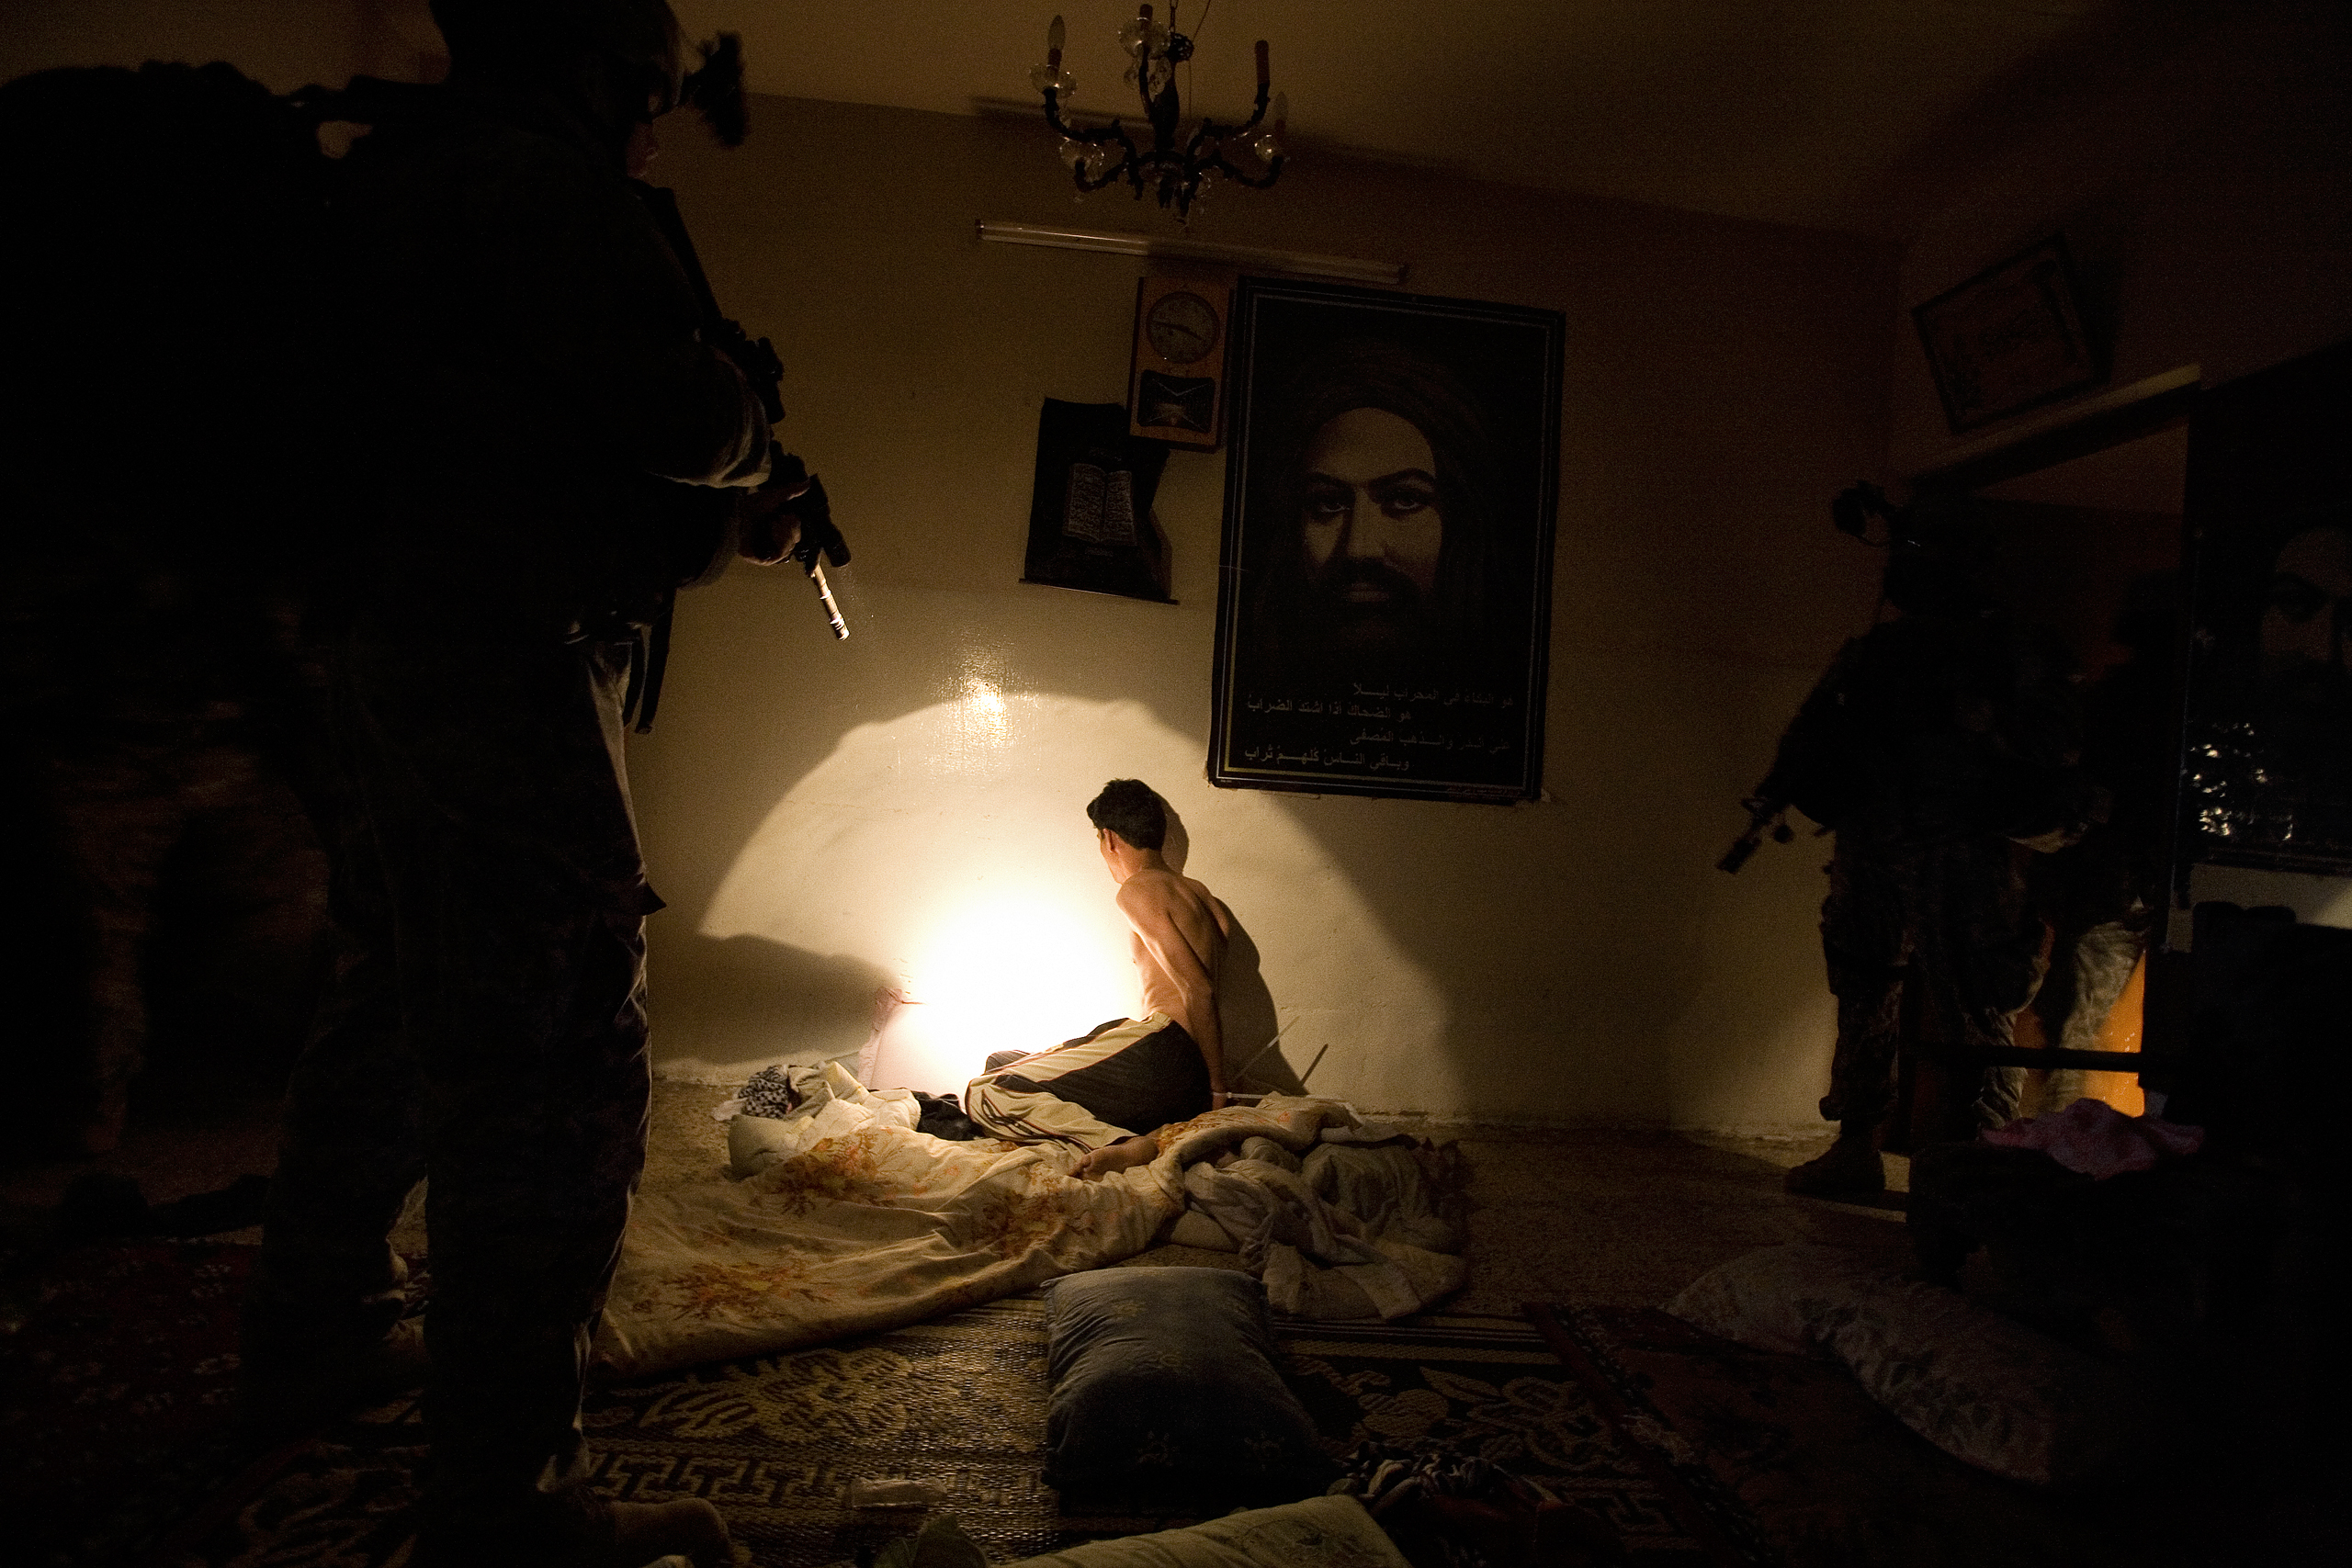 U.S. soldiers arrest a group of suspected Madhi Army members, including this man, in the Shi'te district of Shaab, Baghdad, Iraq, May 28, 2007. The men were accused of kidnapping and killing a Sunni man. (Franco Pagetti—VII for TIME)